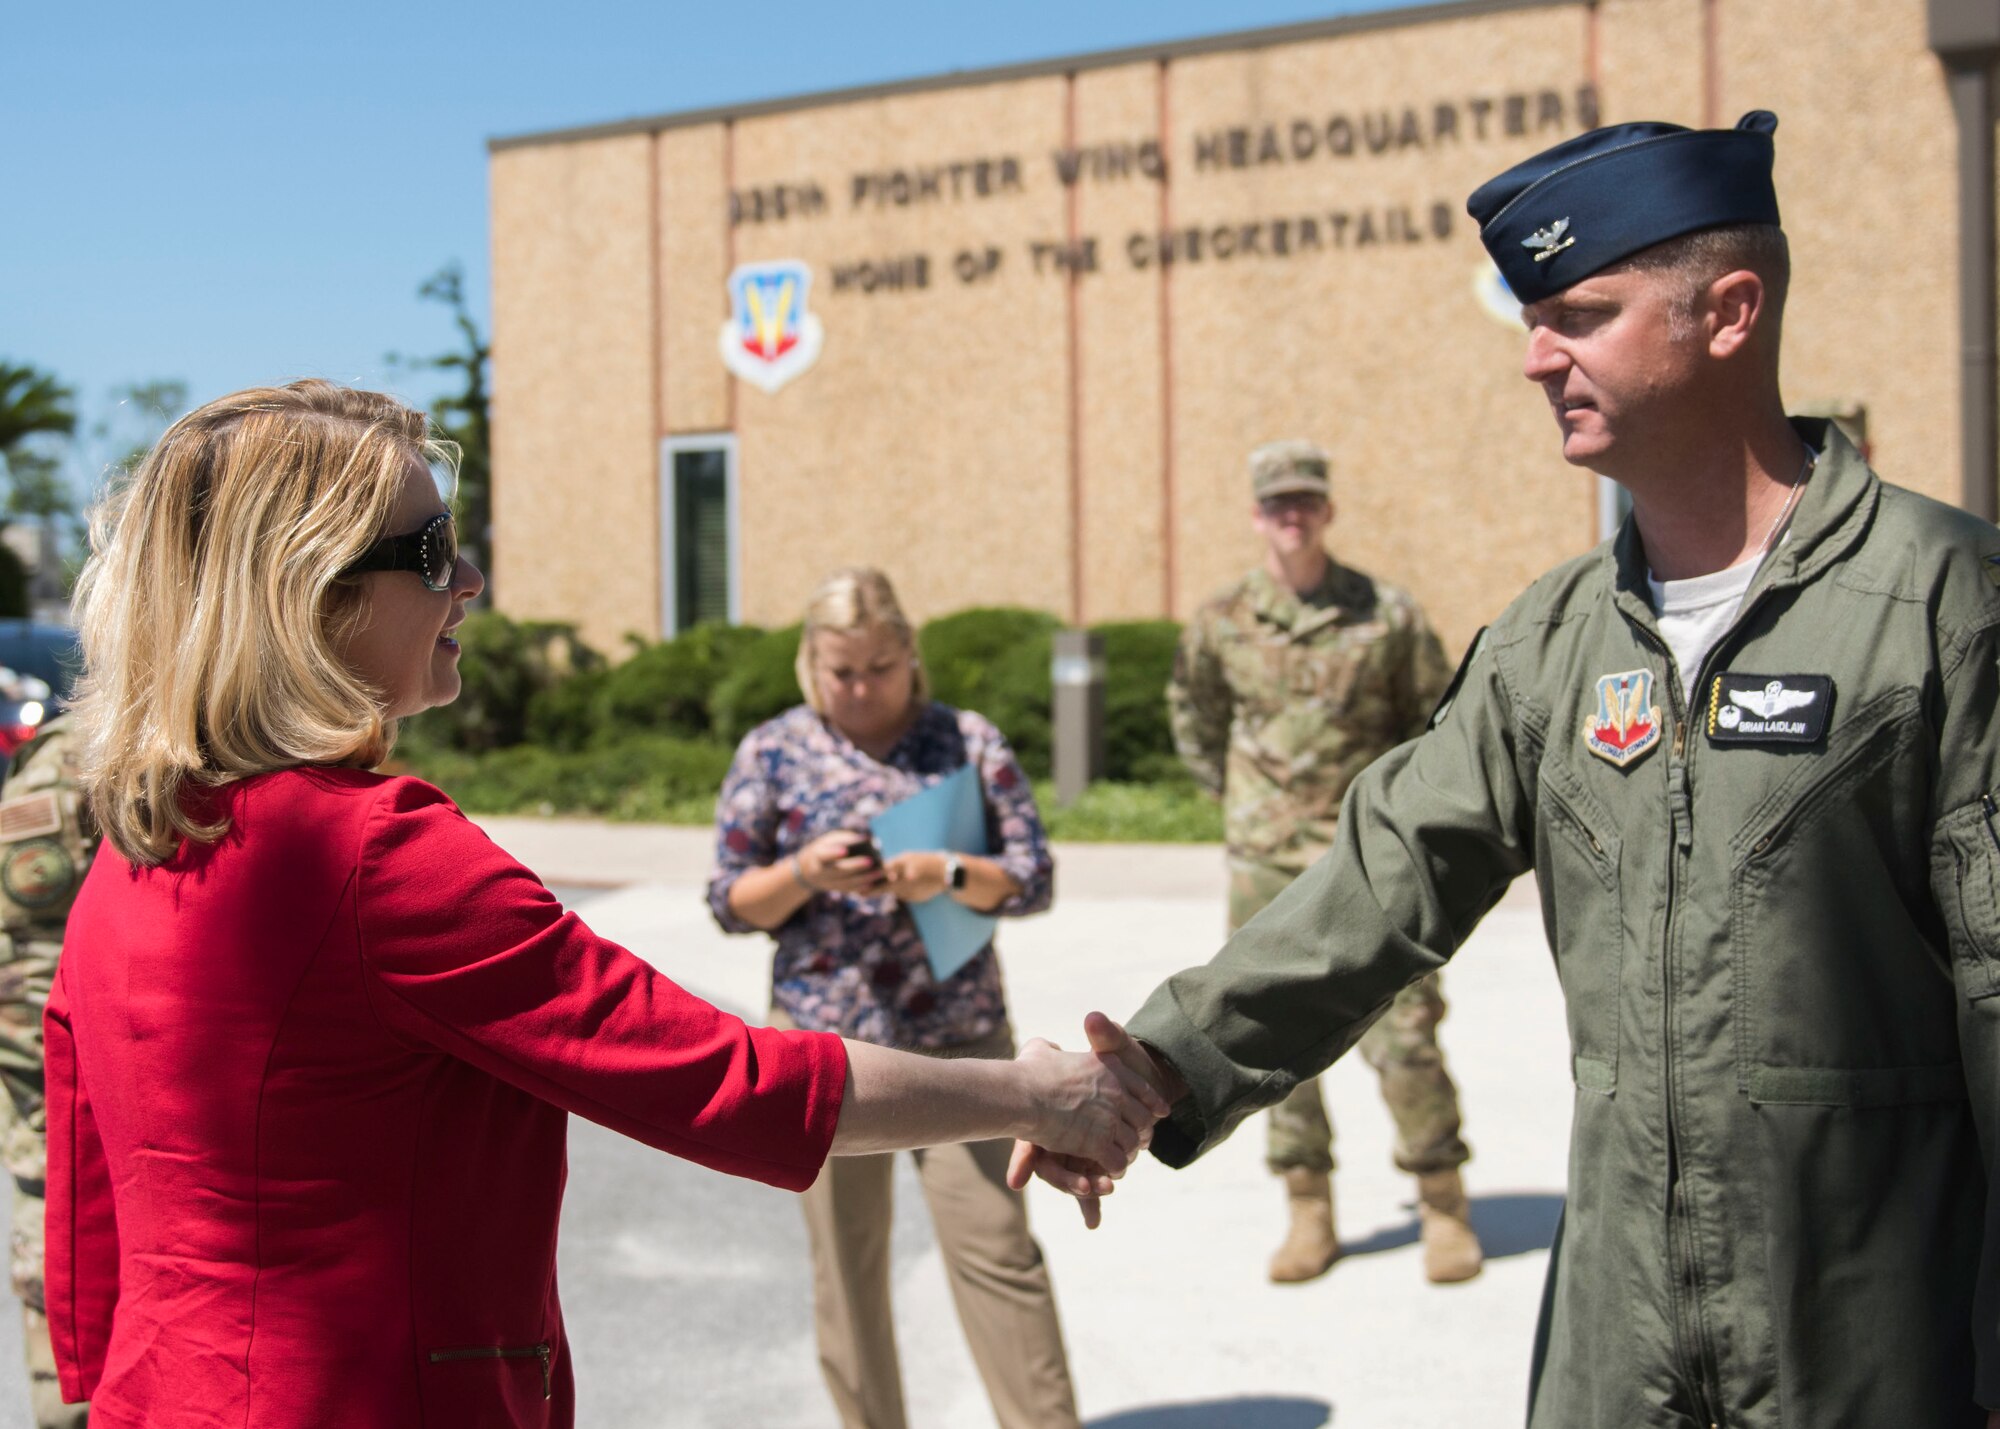 Marilyn M. Thomas, Headquarters U.S. Air Force Principal Deputy Assistant Secretary for Financial Management and Comptroller, meets U.S. Air Force Col. Brian Laidlaw, 325th Fighter Wing commander, May 22, 2019, at Tyndall Air Force Base, Florida.